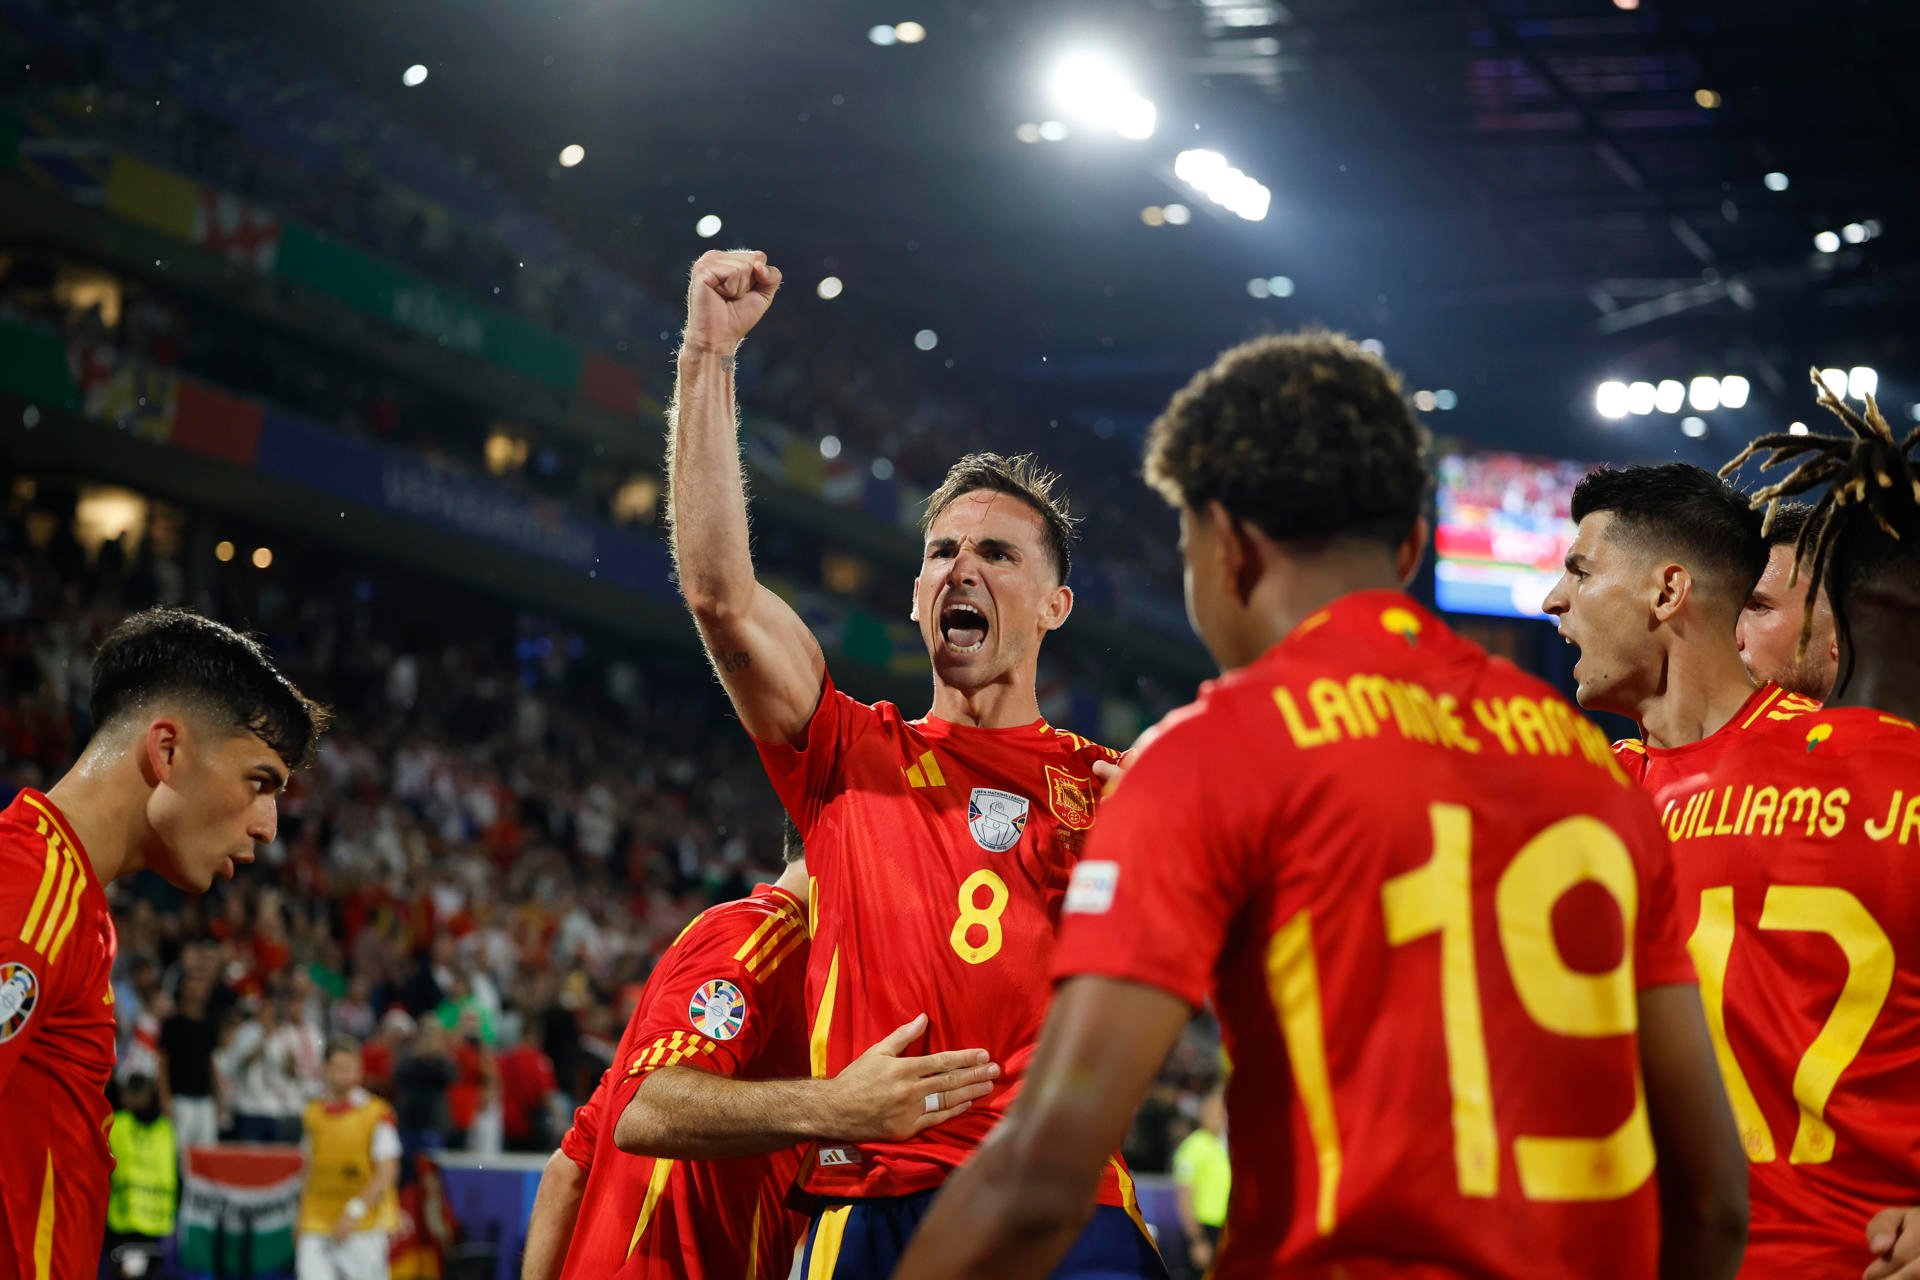 Fabian insisted that Spain wants to "do something historic"